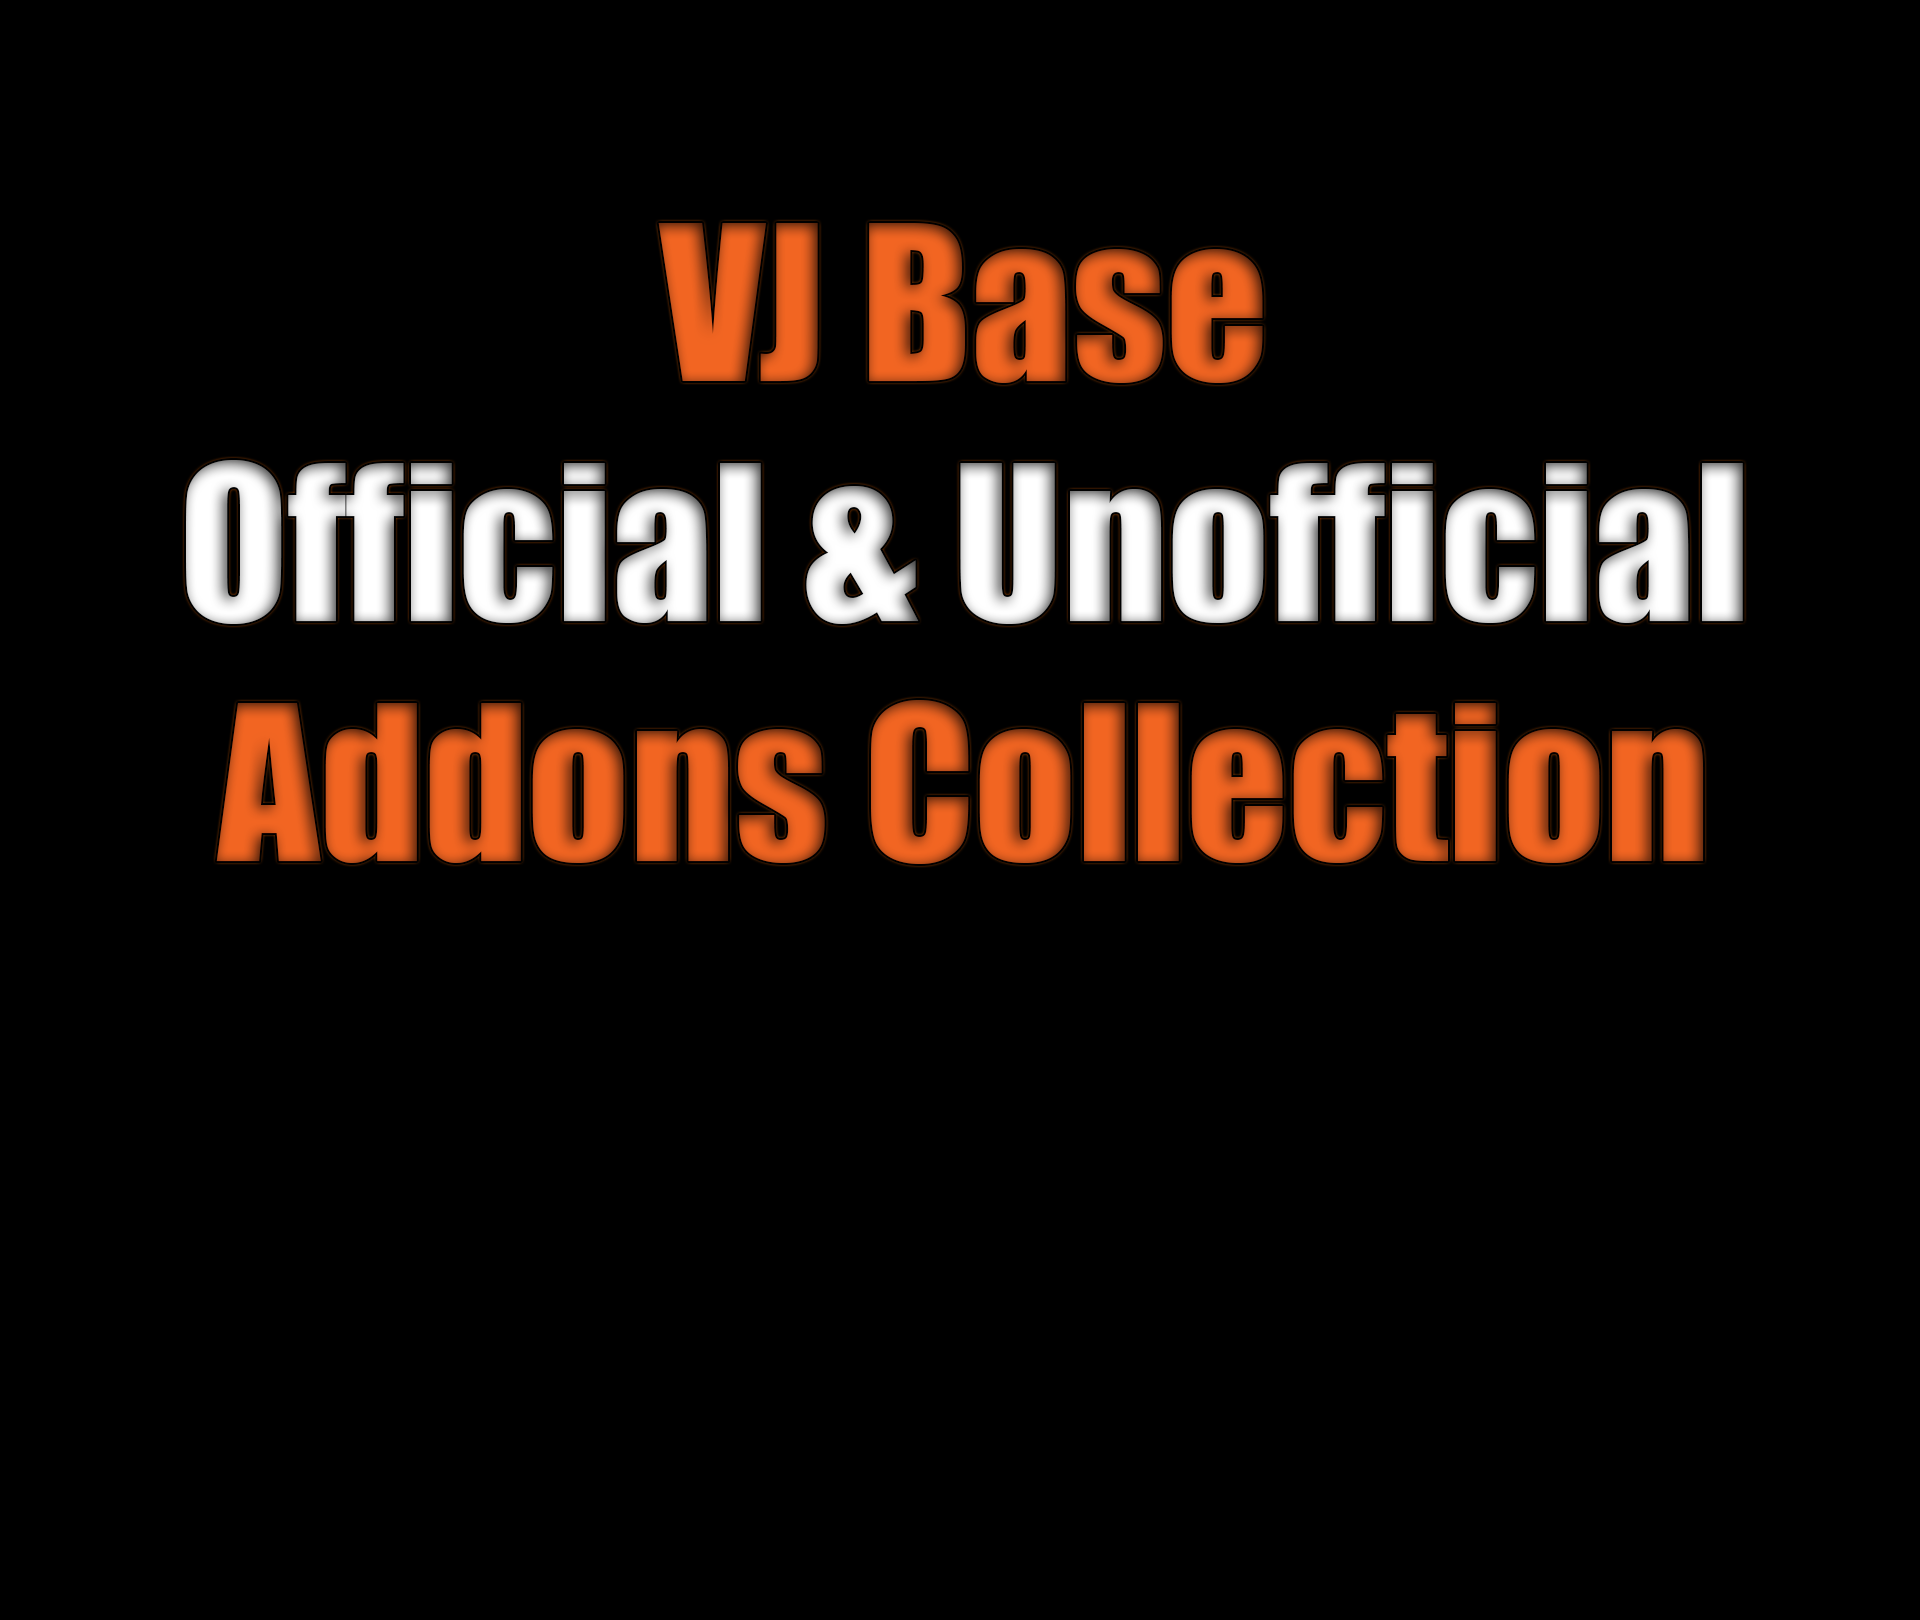 Steam Workshop :: VJ Base Official and Unofficial Addons - 